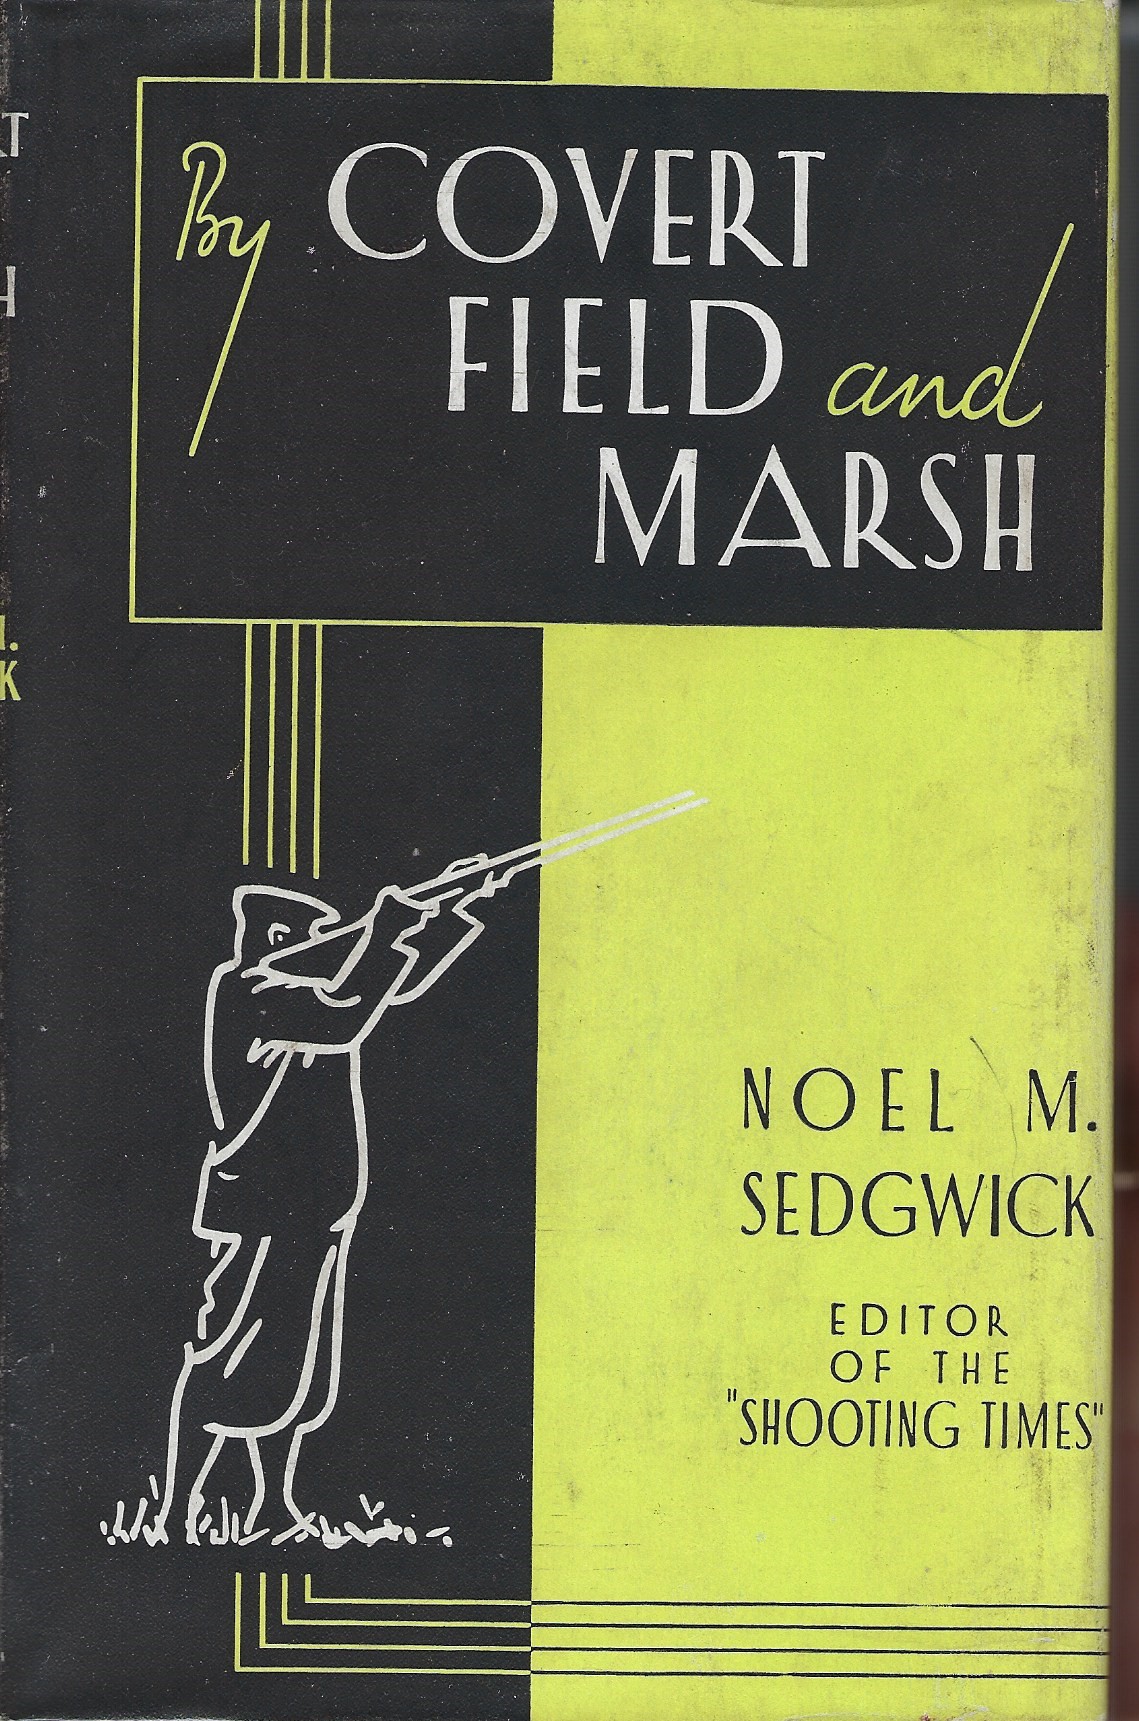 Image for By Covert Field and Marsh.